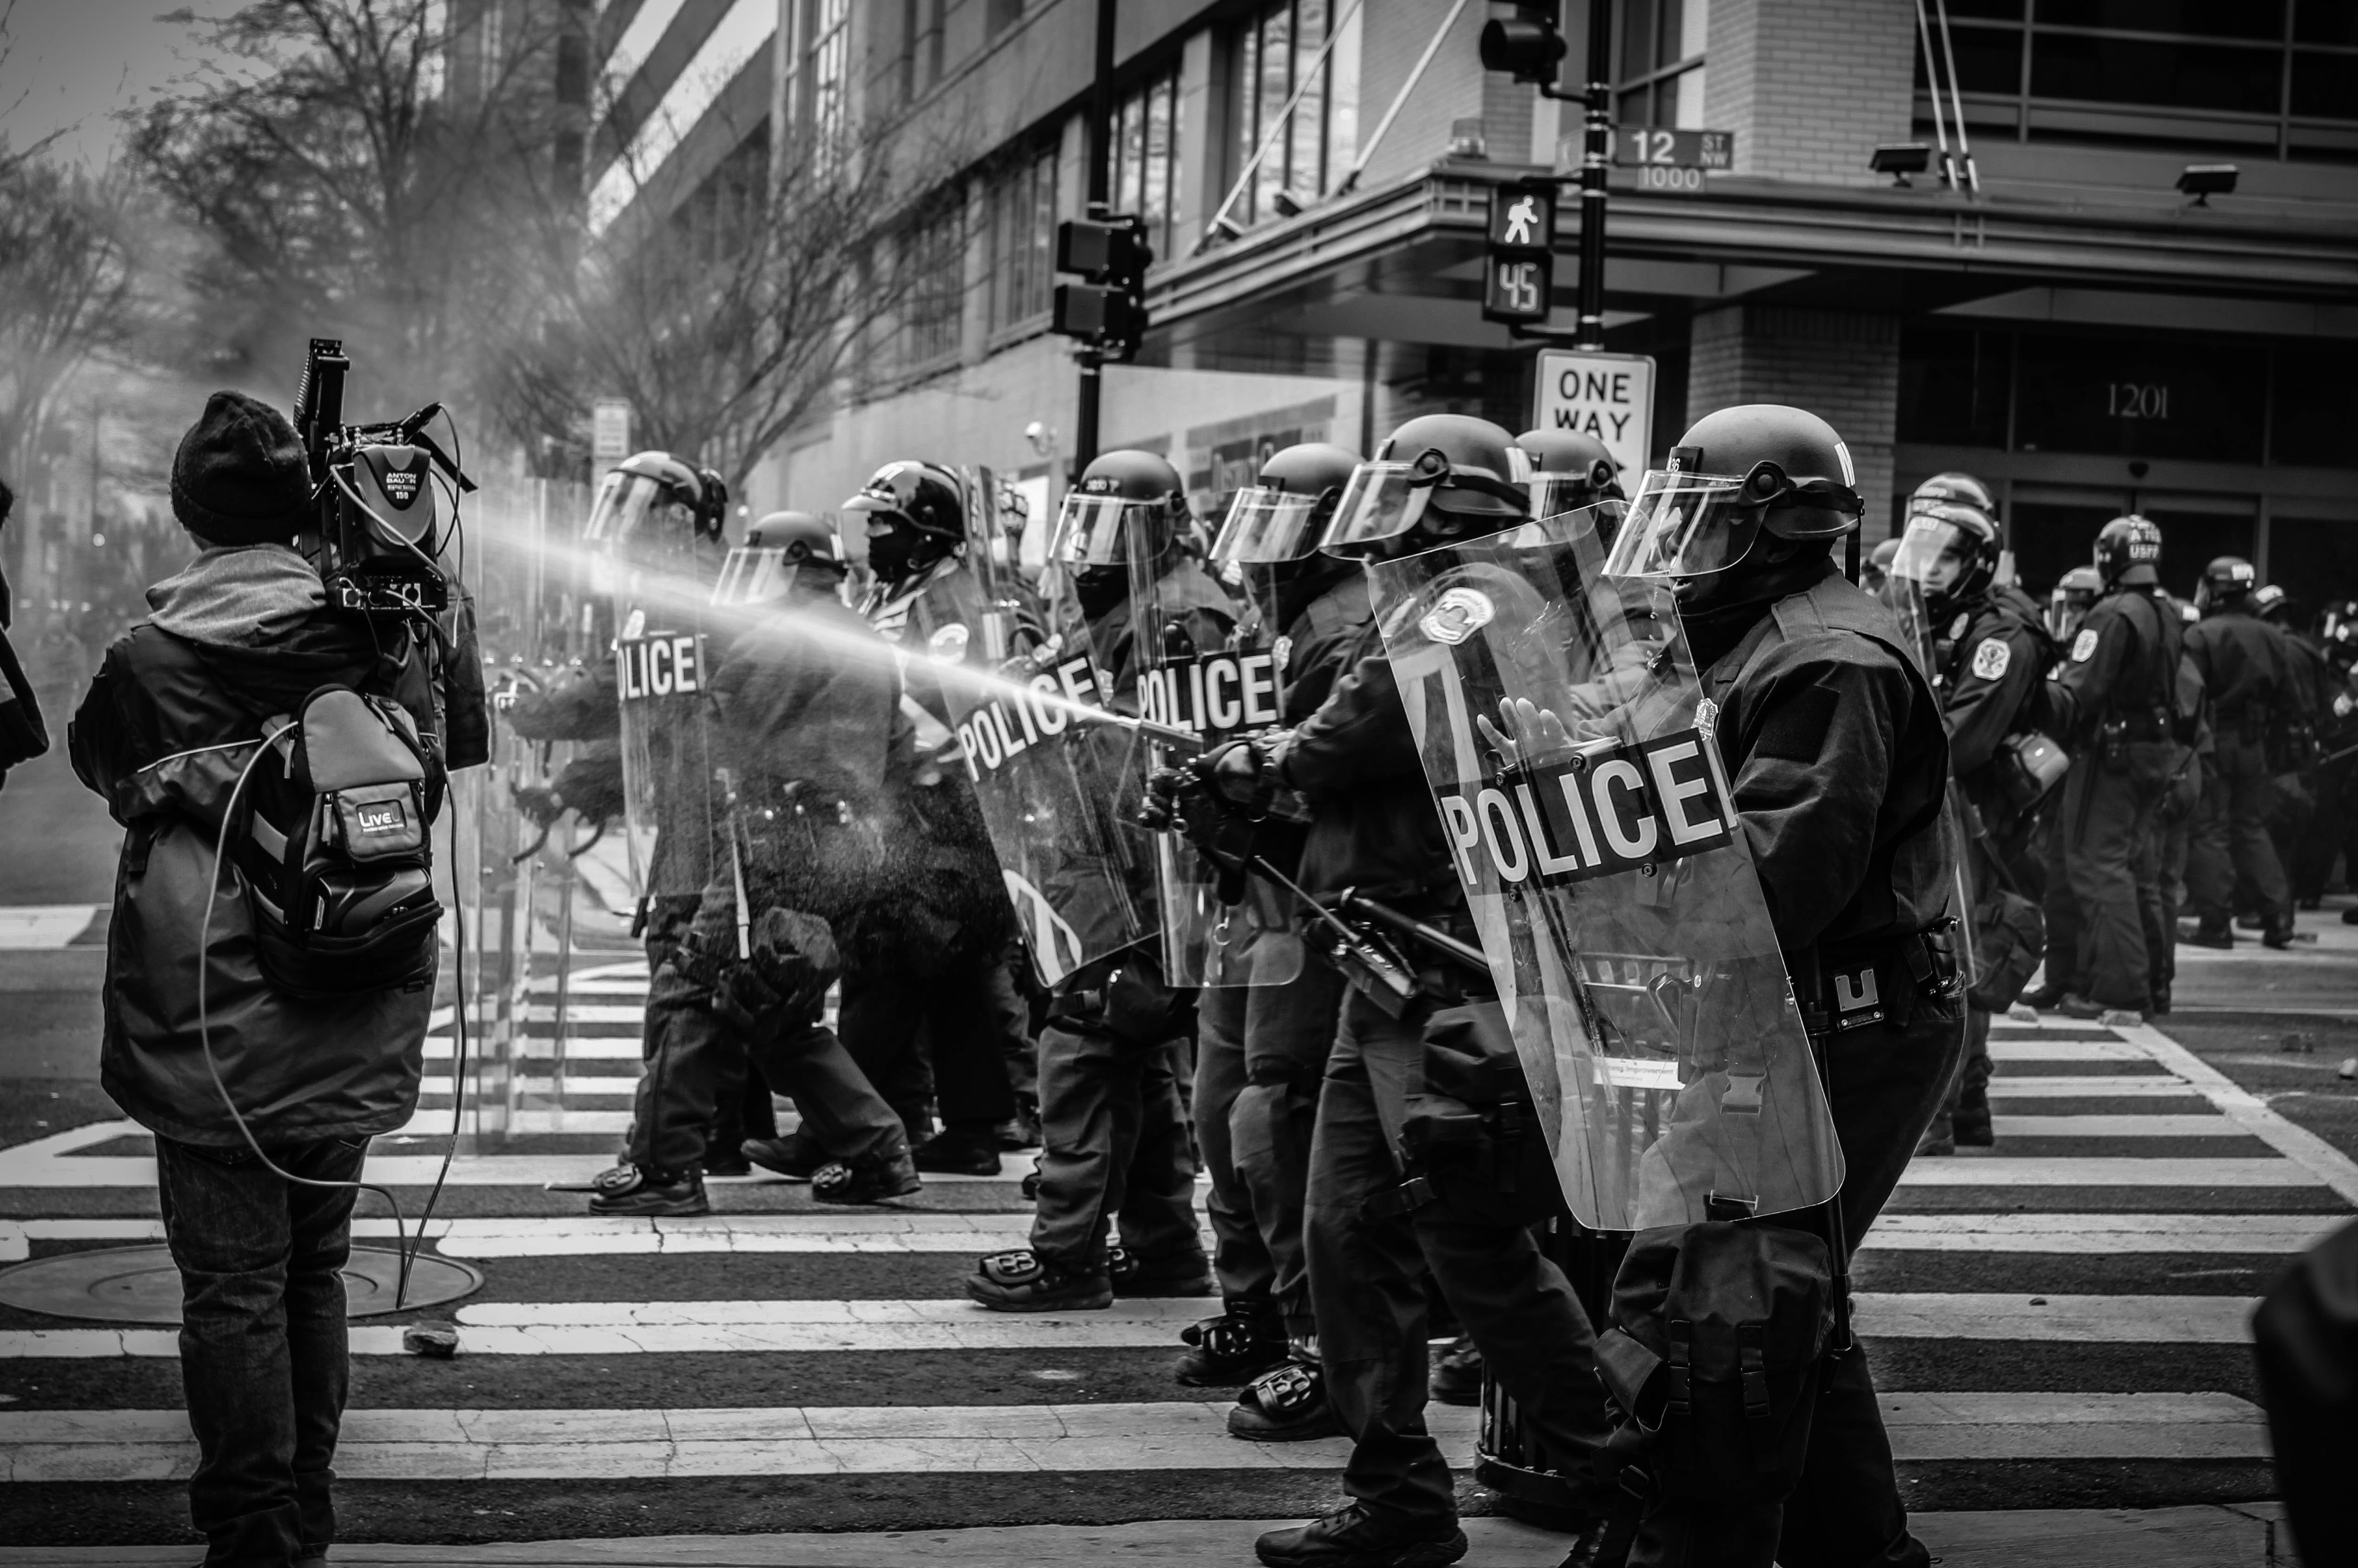 Police in riot gear, one spraying what looks like pepper spray; image by Spenser H, via Unsplash.com.